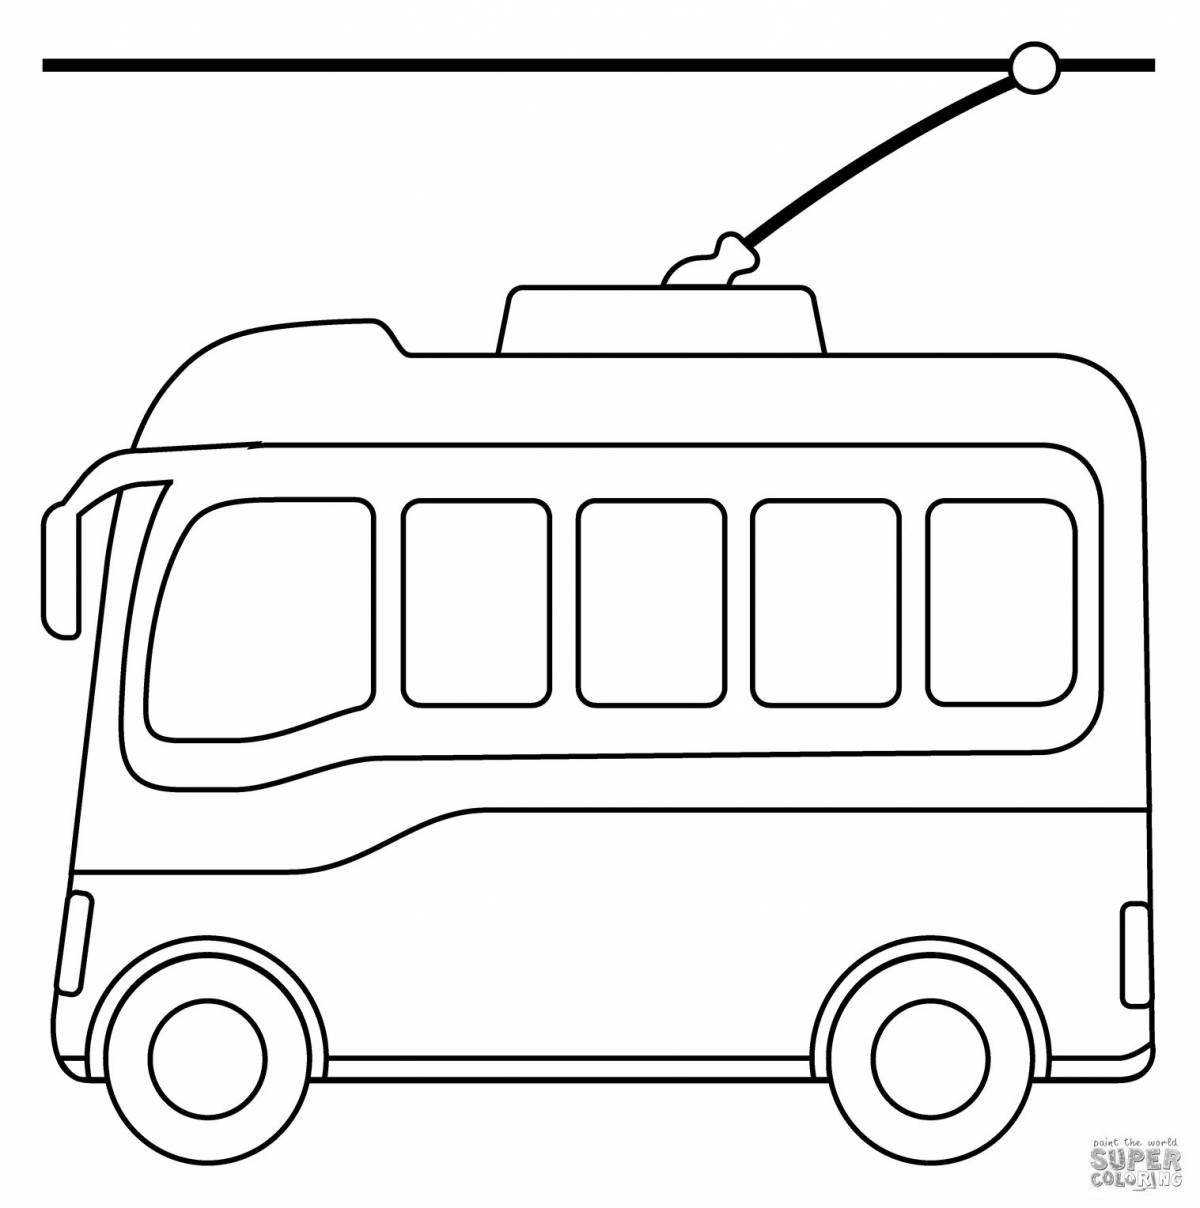 Bright trolleybus coloring book for kids